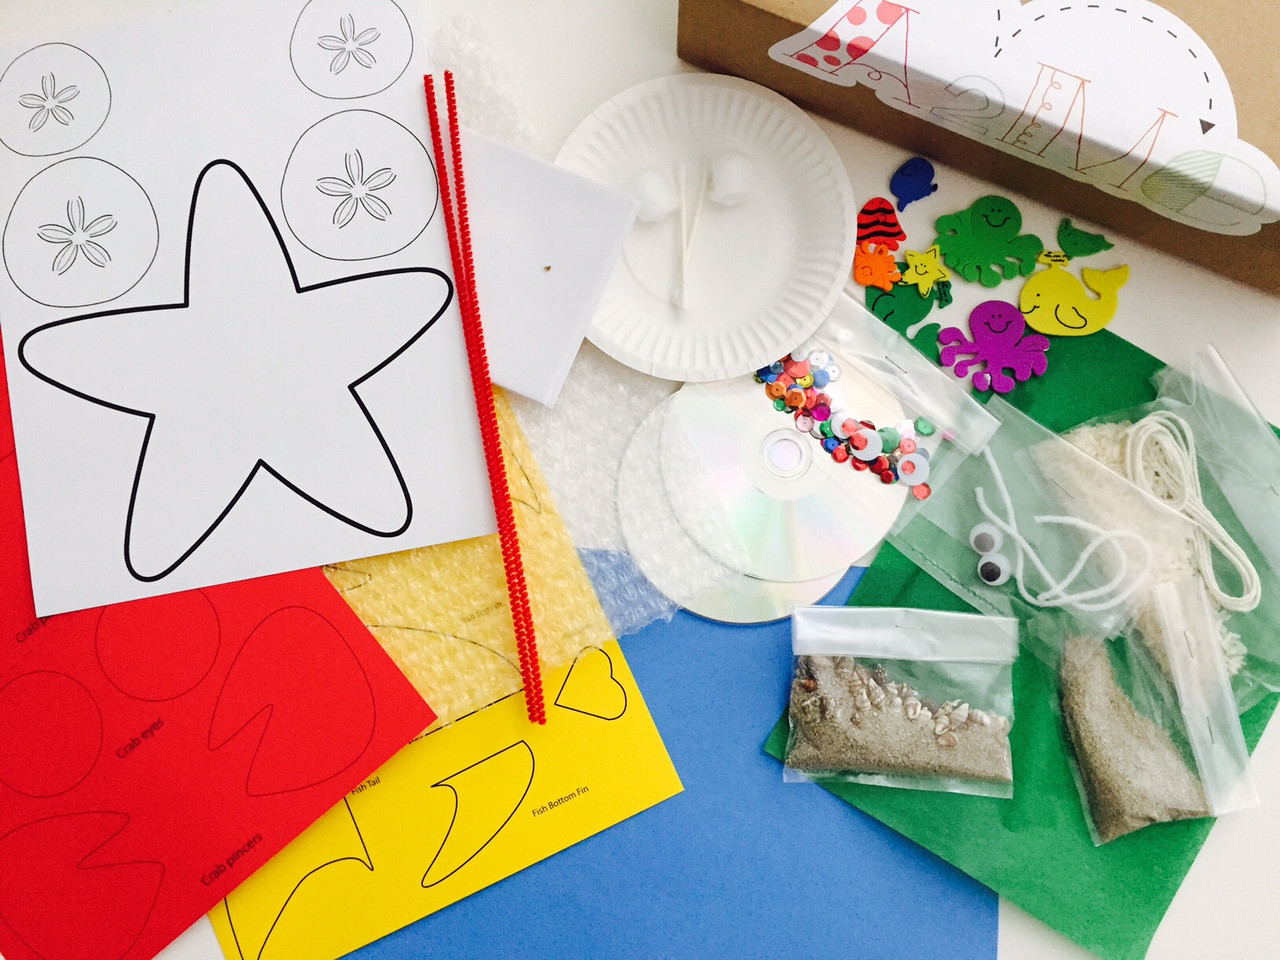 A Crafts For Preschoolers
 A2Me Preschool Announces Curated Craft Kits for 2015 2016